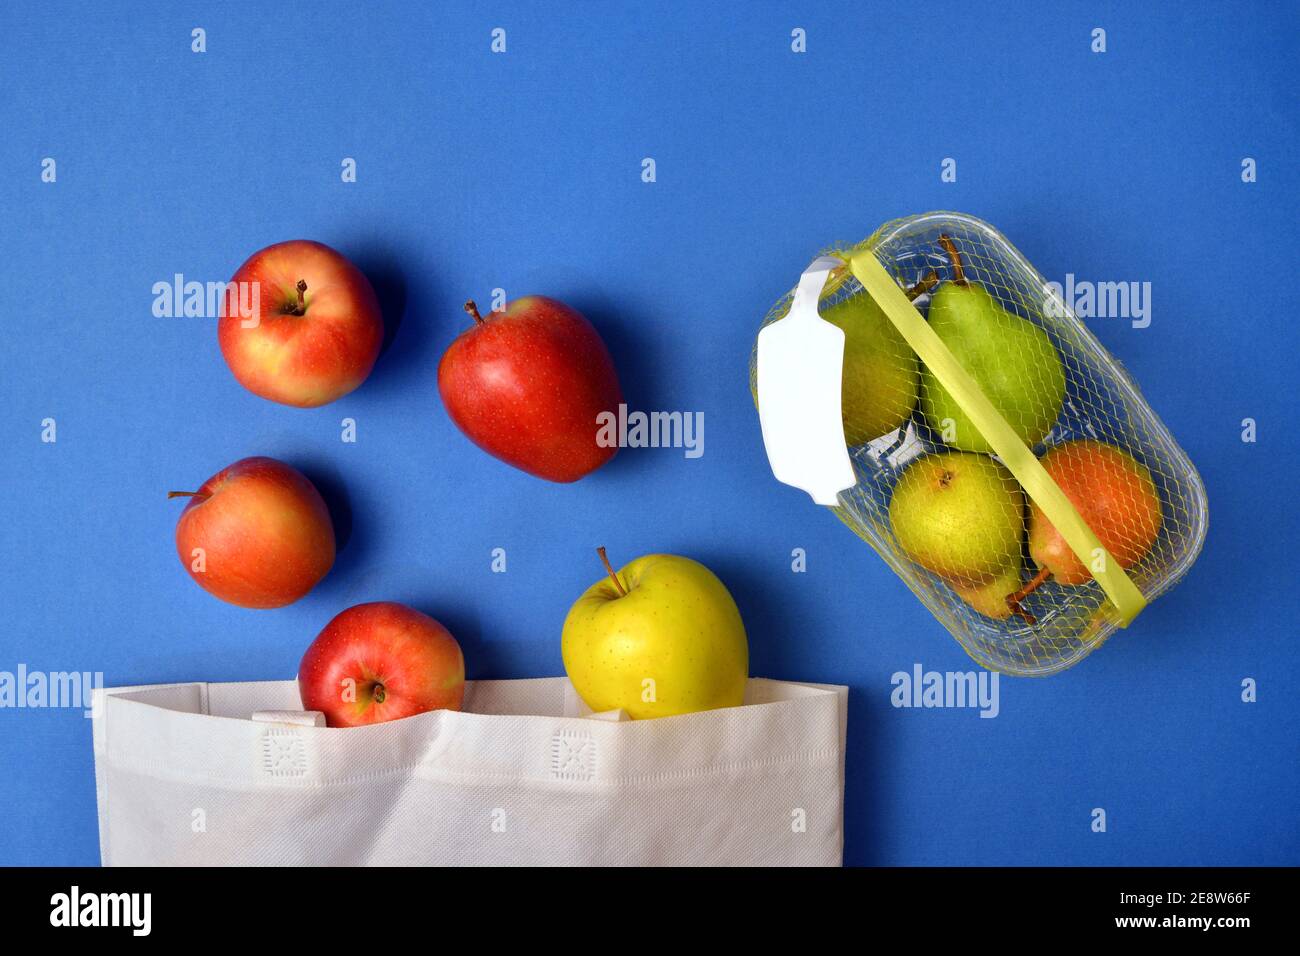 Detail of fruit purchased in plastic packaging and in reusable fabric bags Stock Photo